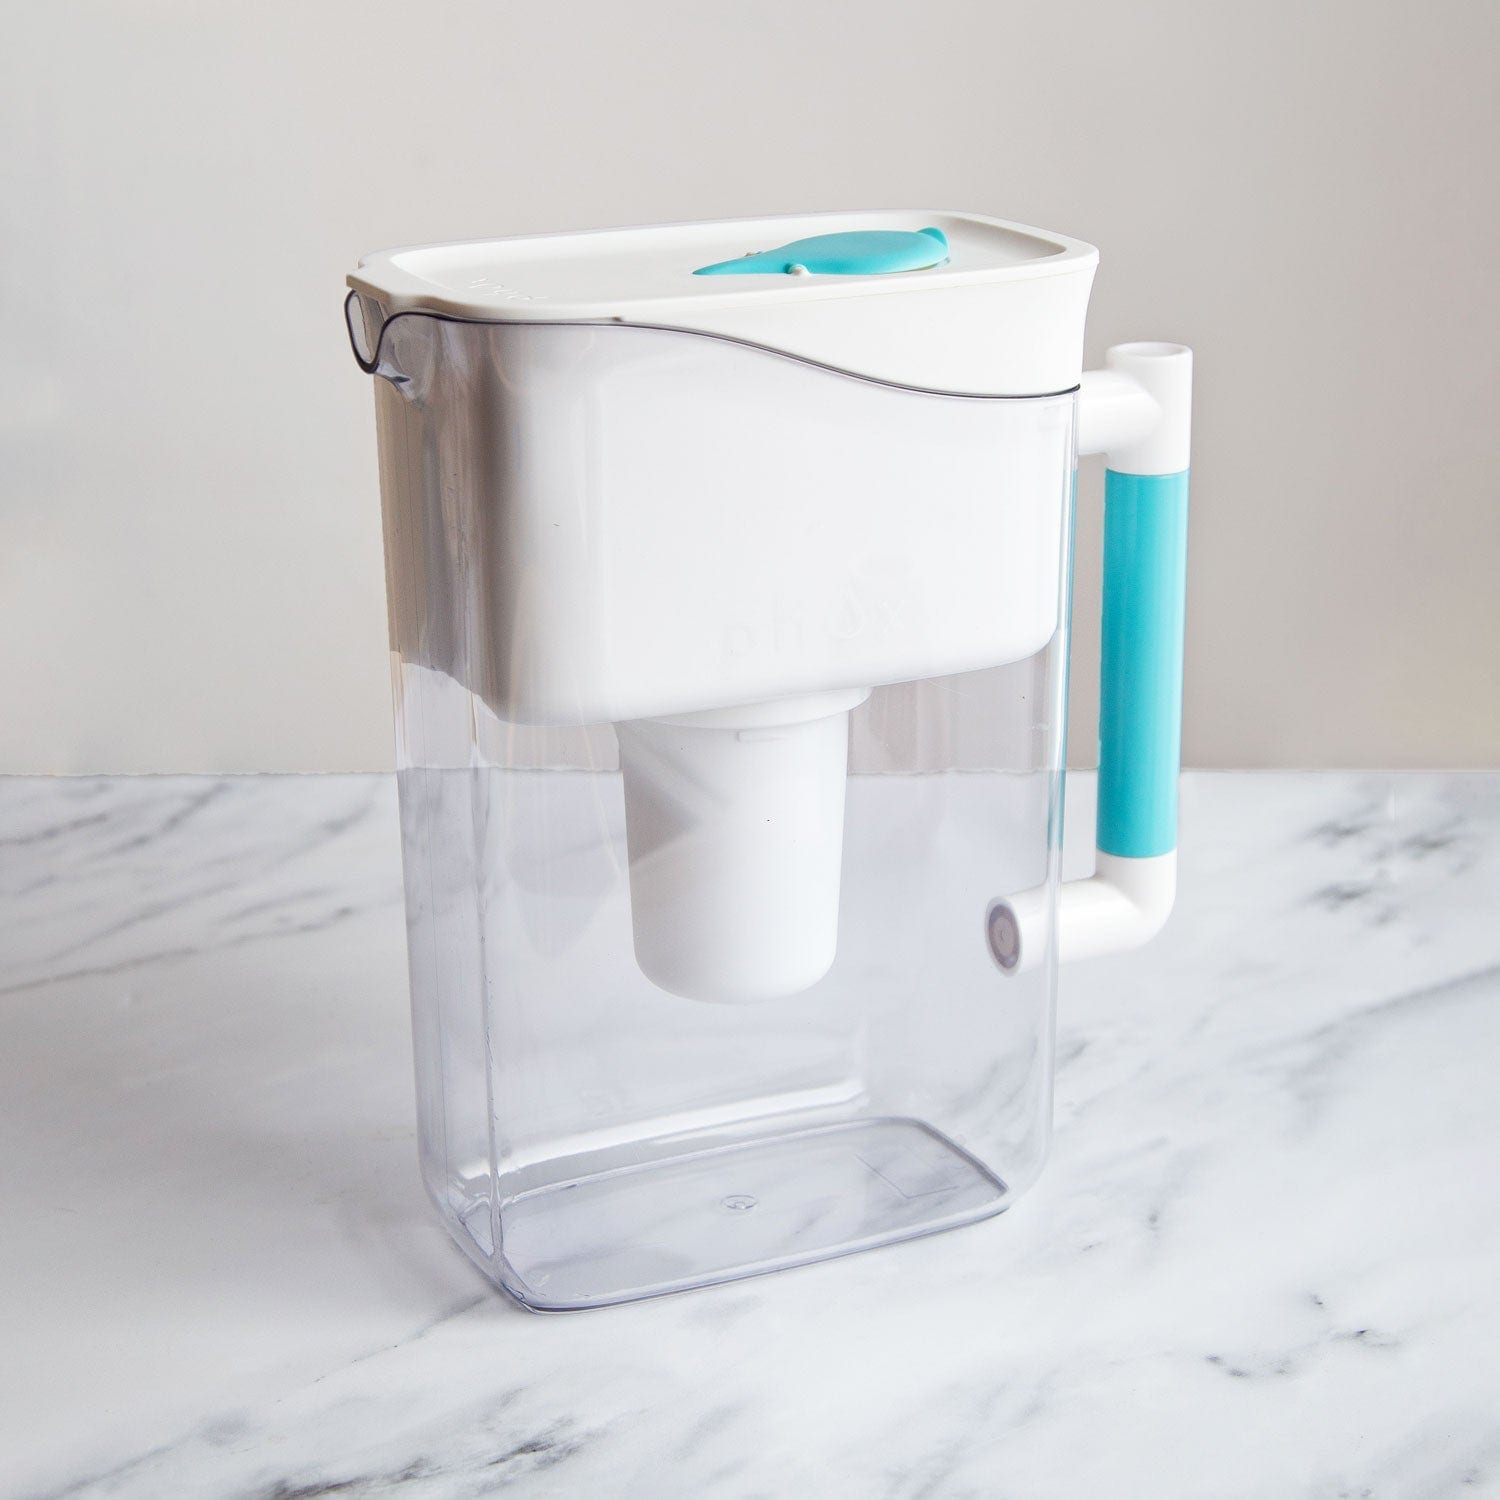 Phox Wave 2.8L Water Filter Jug, fits in your fridge